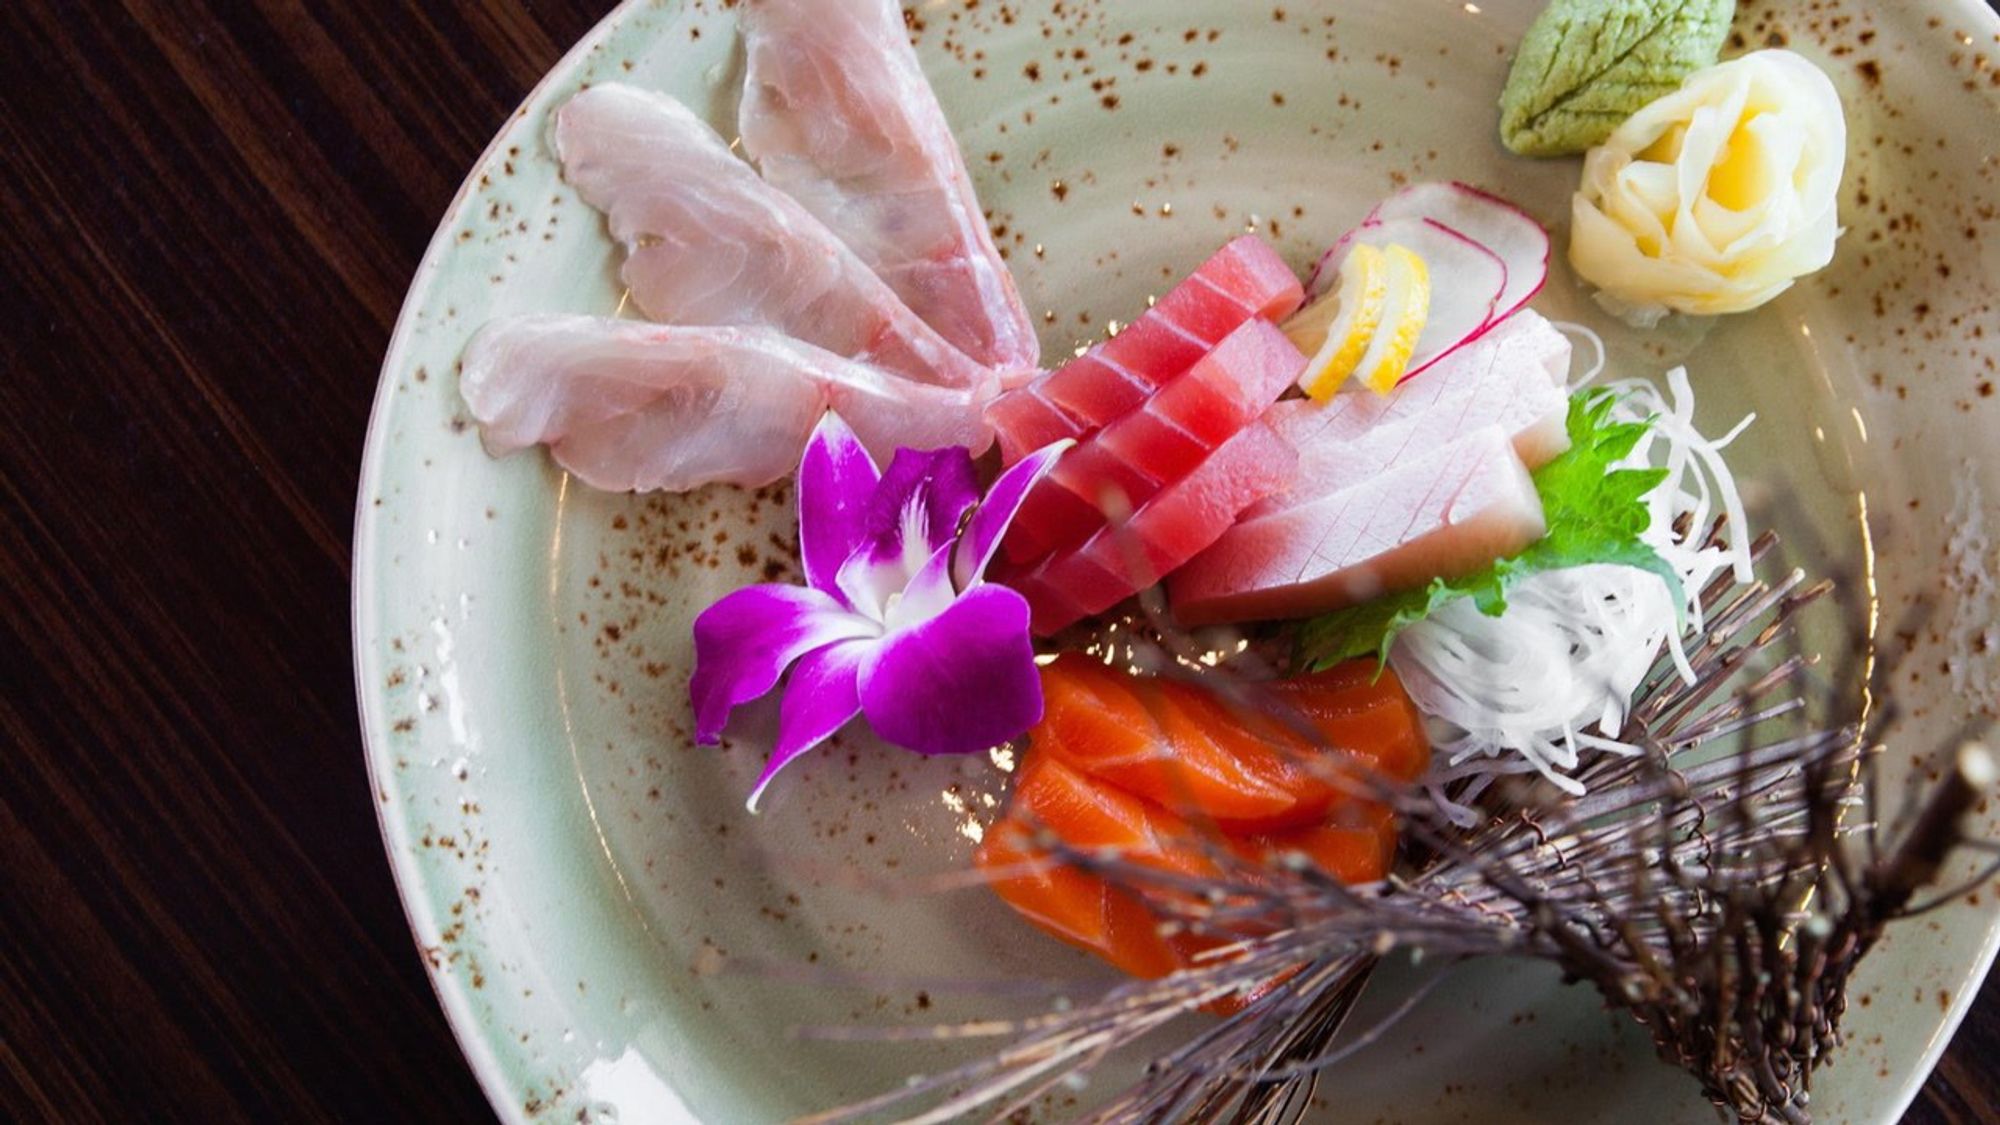 Sushi and Japanese Cuisine comes to Cannon Beach